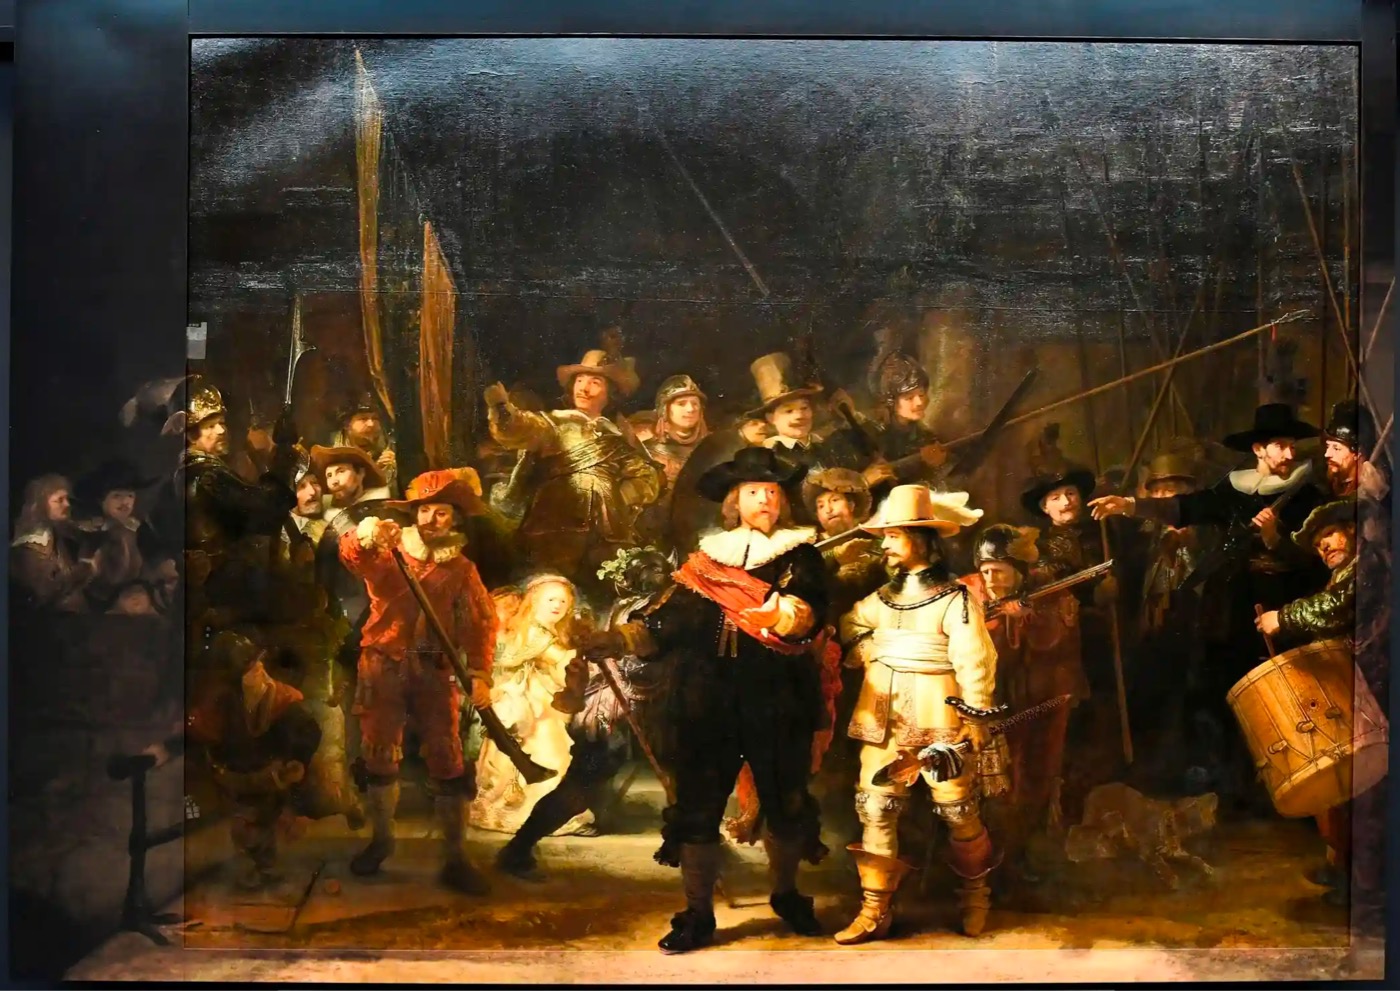 a full frame version of Rembrandt's The Night Watch painting